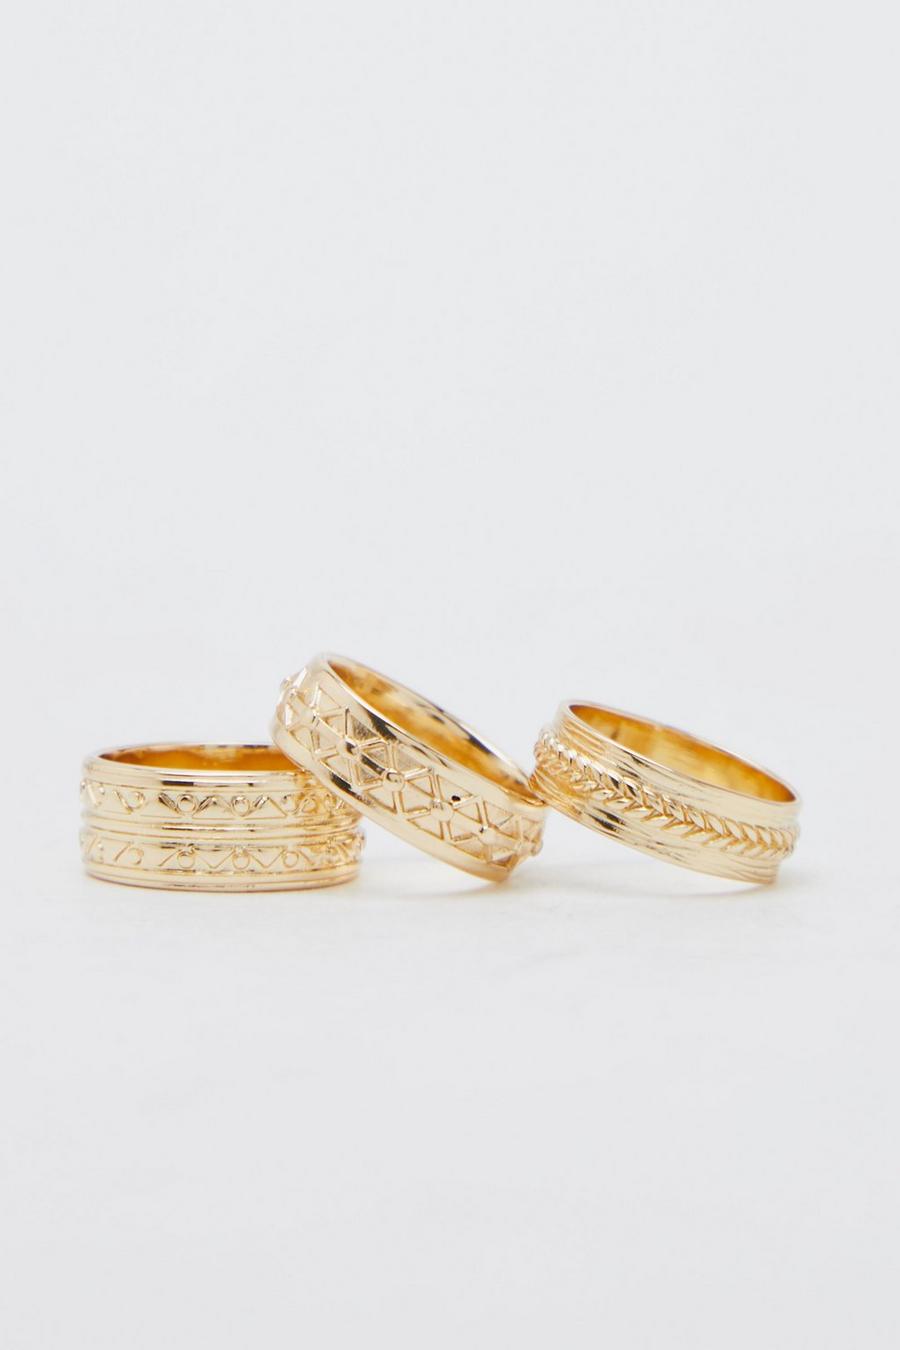 Gold Textured And Rope Design 3 Pack Rings image number 1